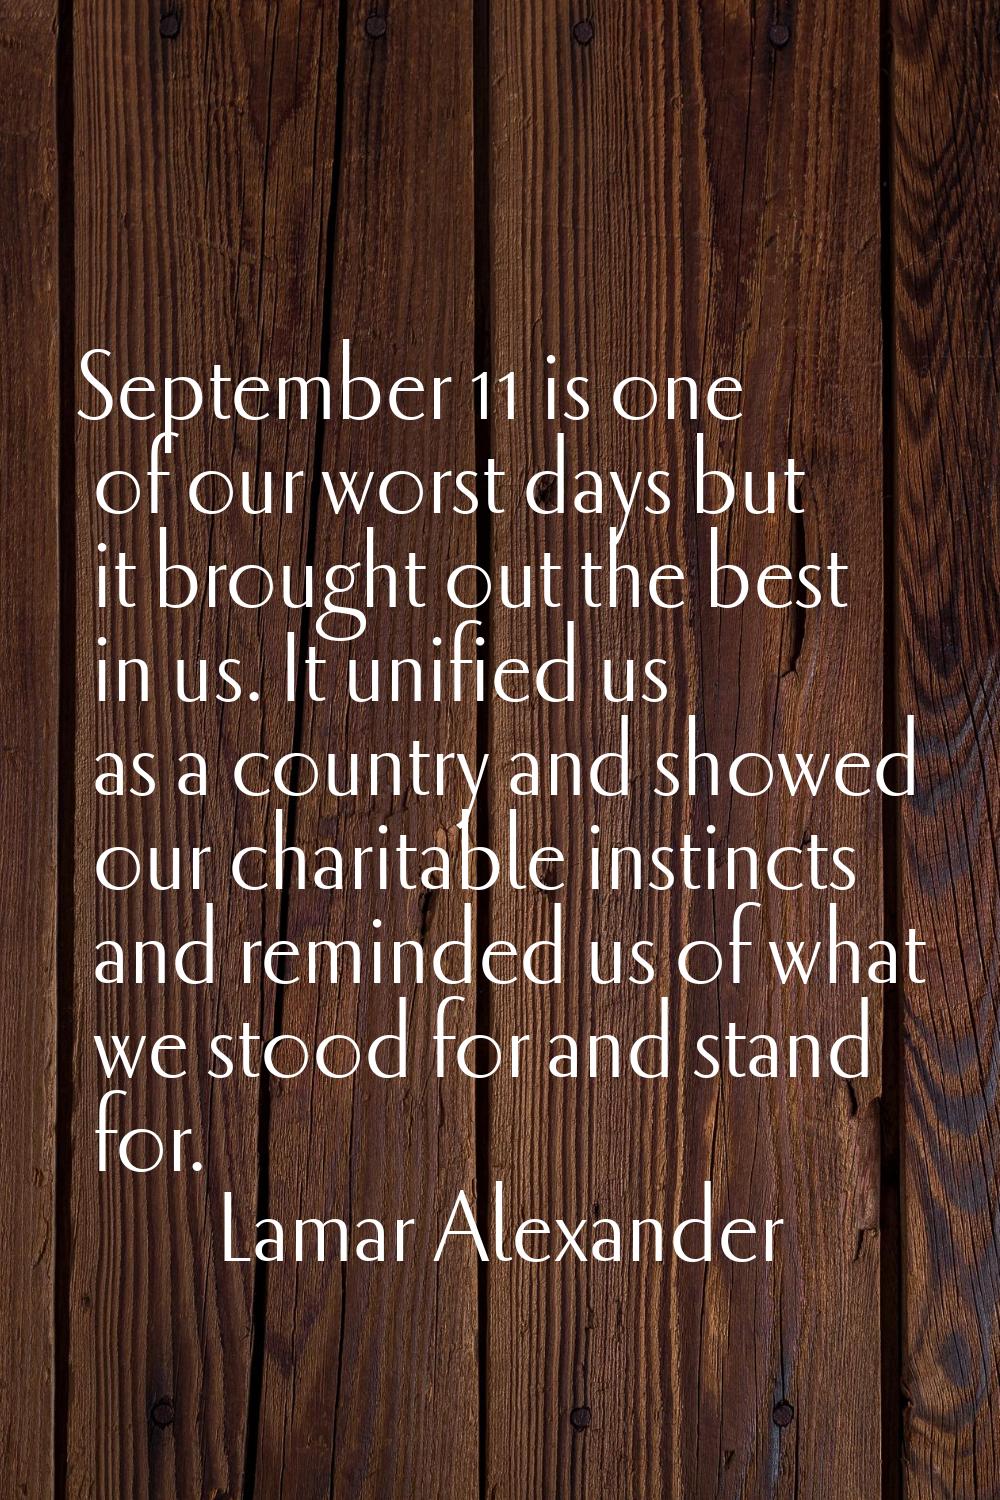 September 11 is one of our worst days but it brought out the best in us. It unified us as a country